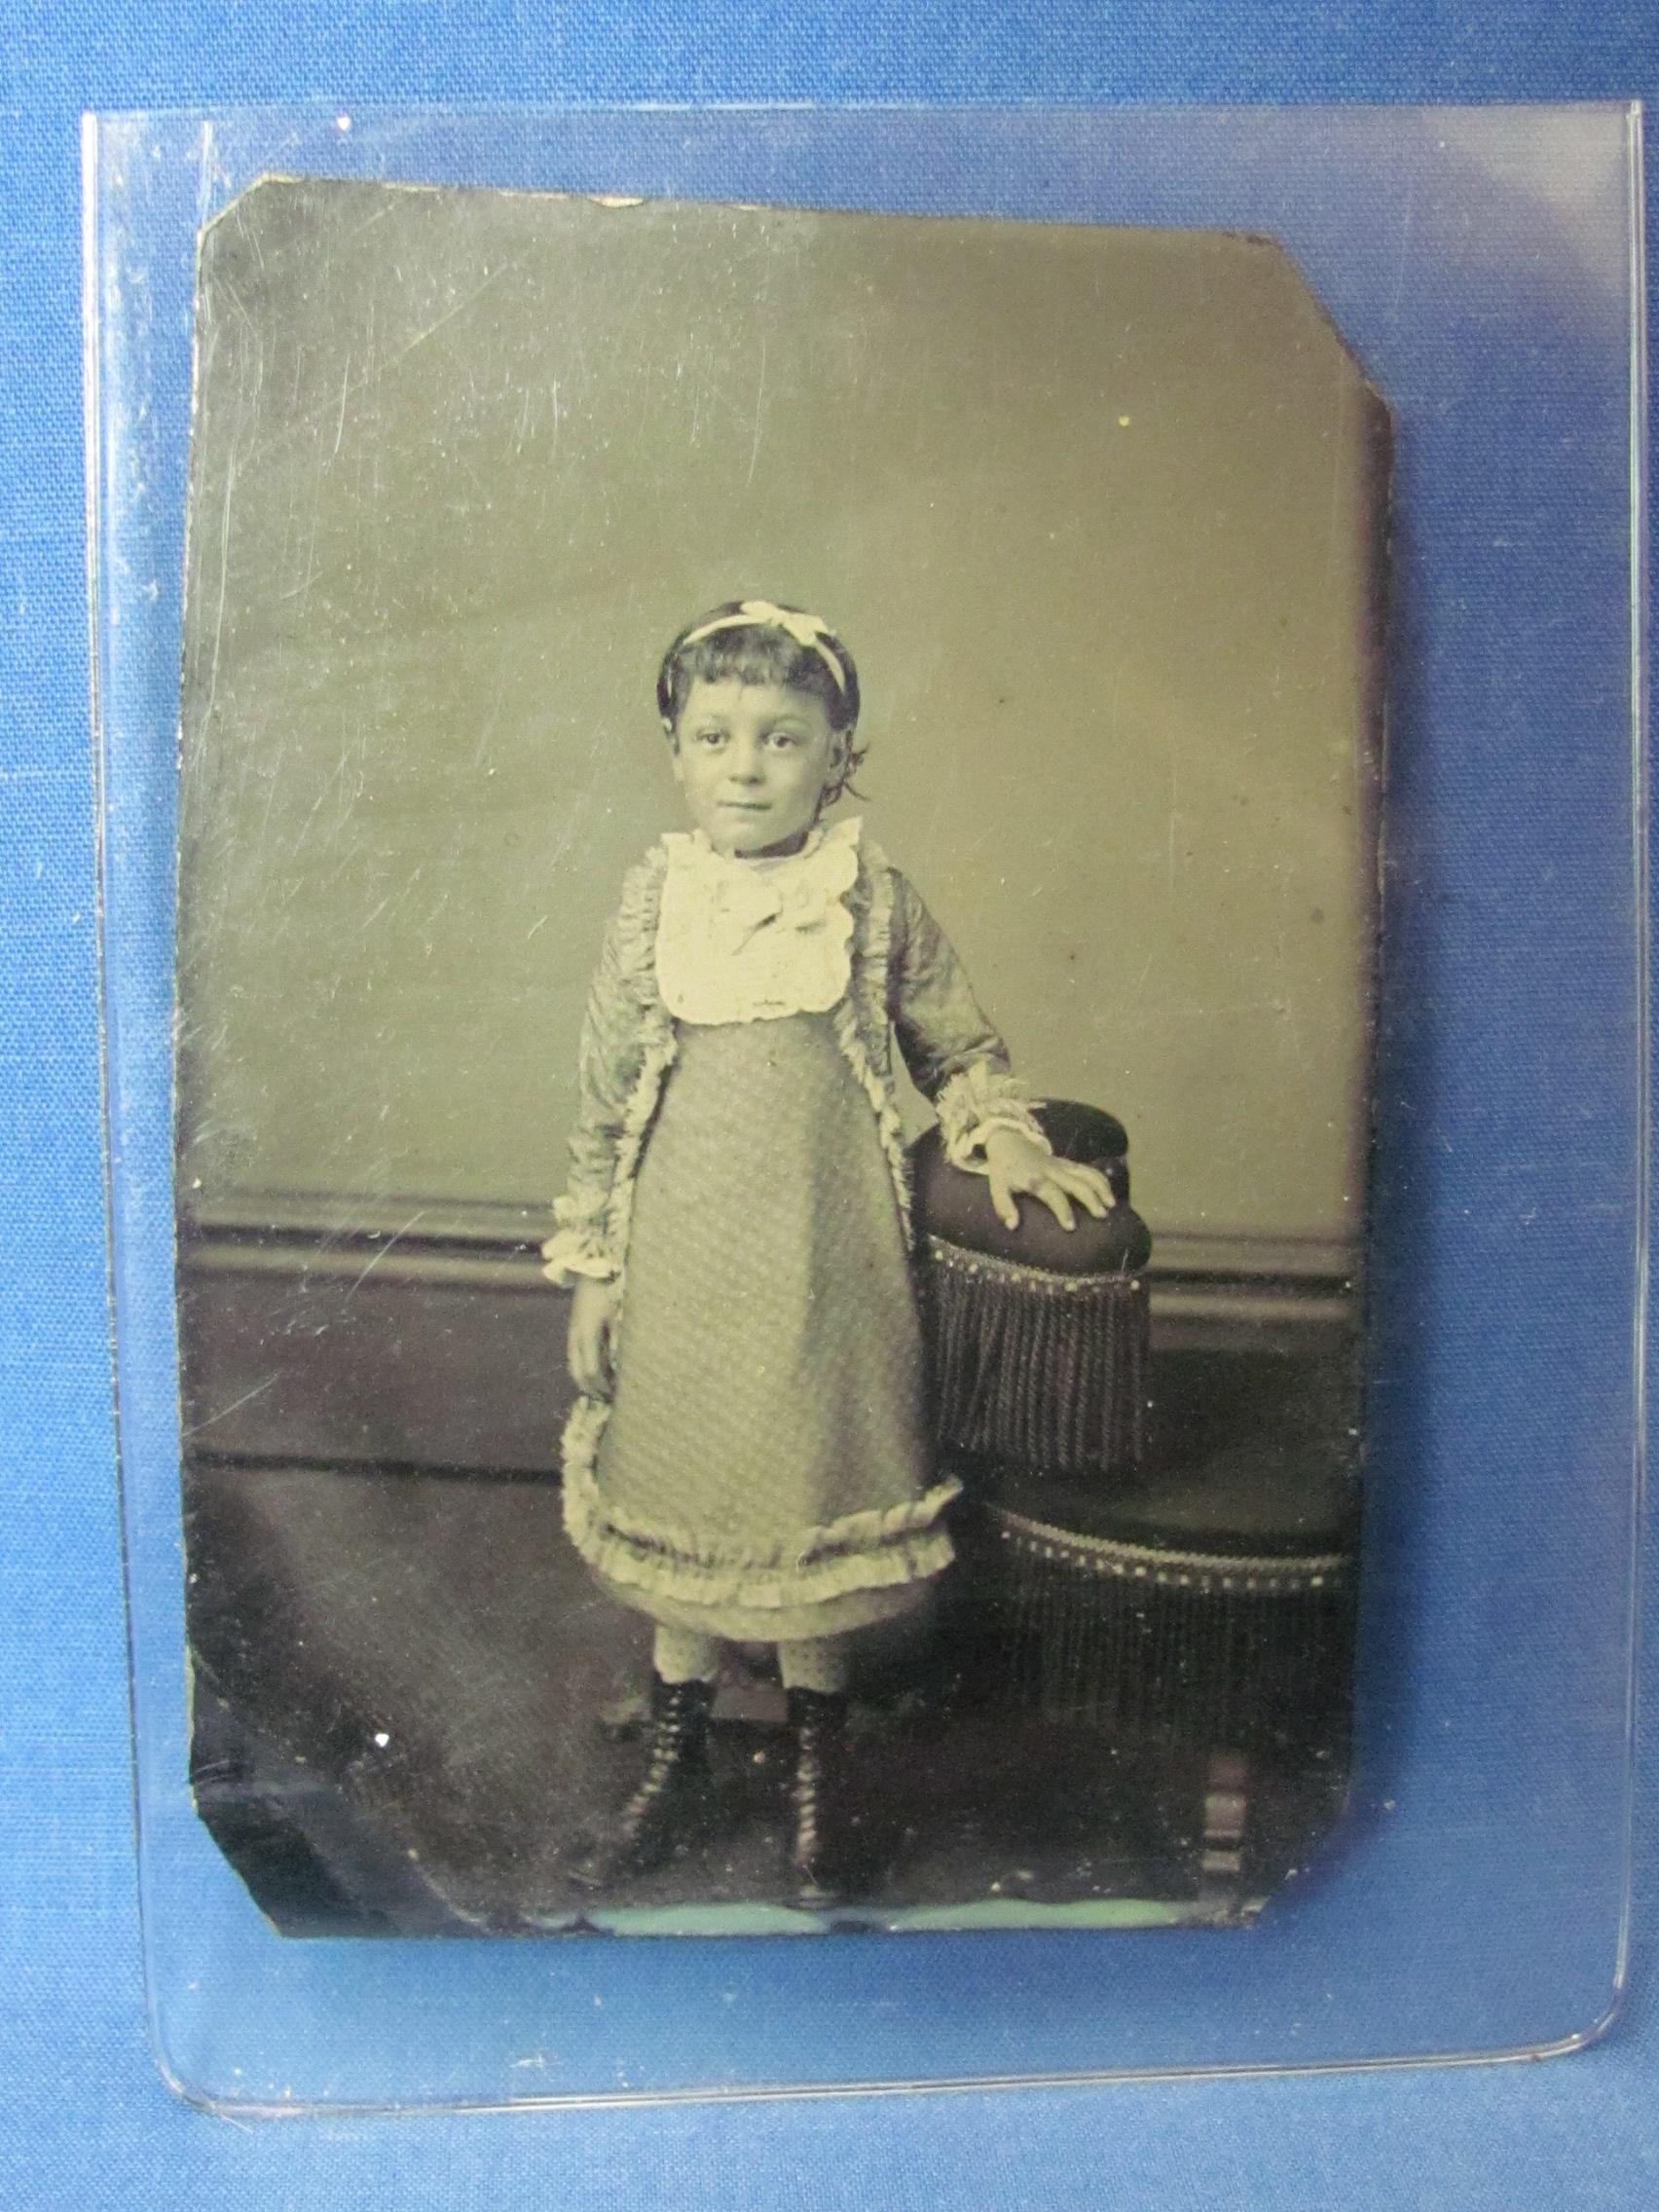 7 Tin Type Photographs – 2 in Brown Case – About 3 1/2” long – Condition varies – As shown